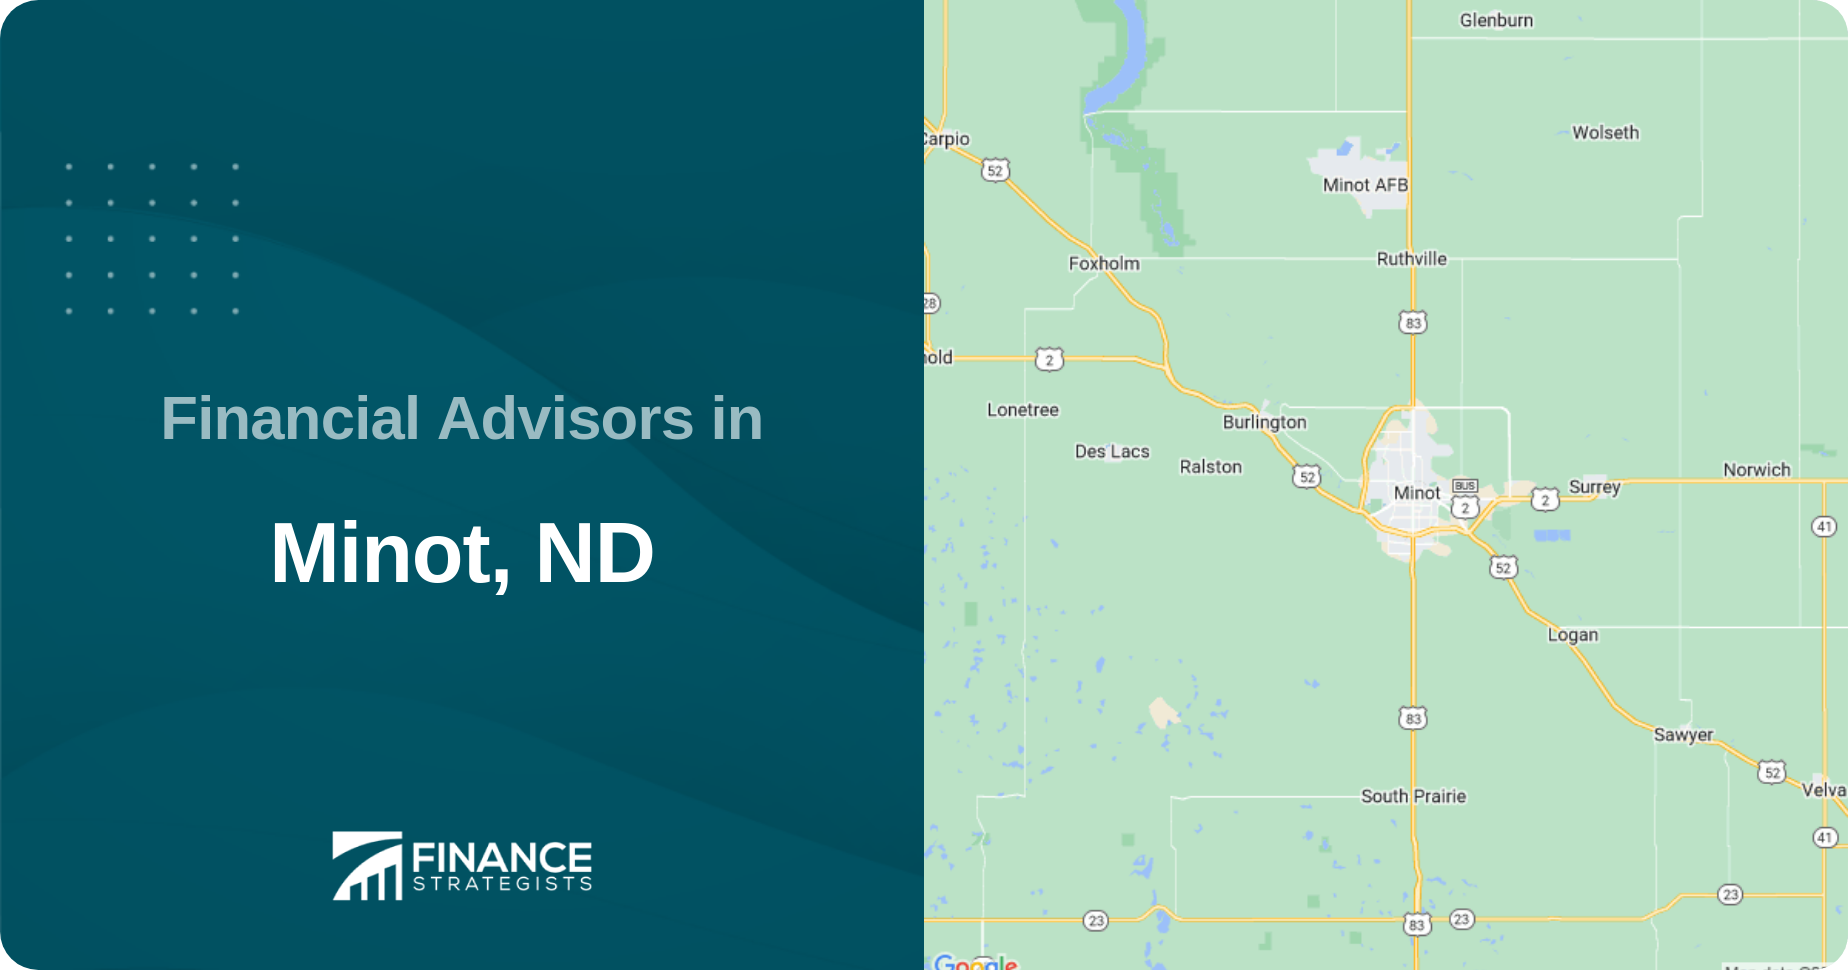 Financial Advisors in Minot, ND